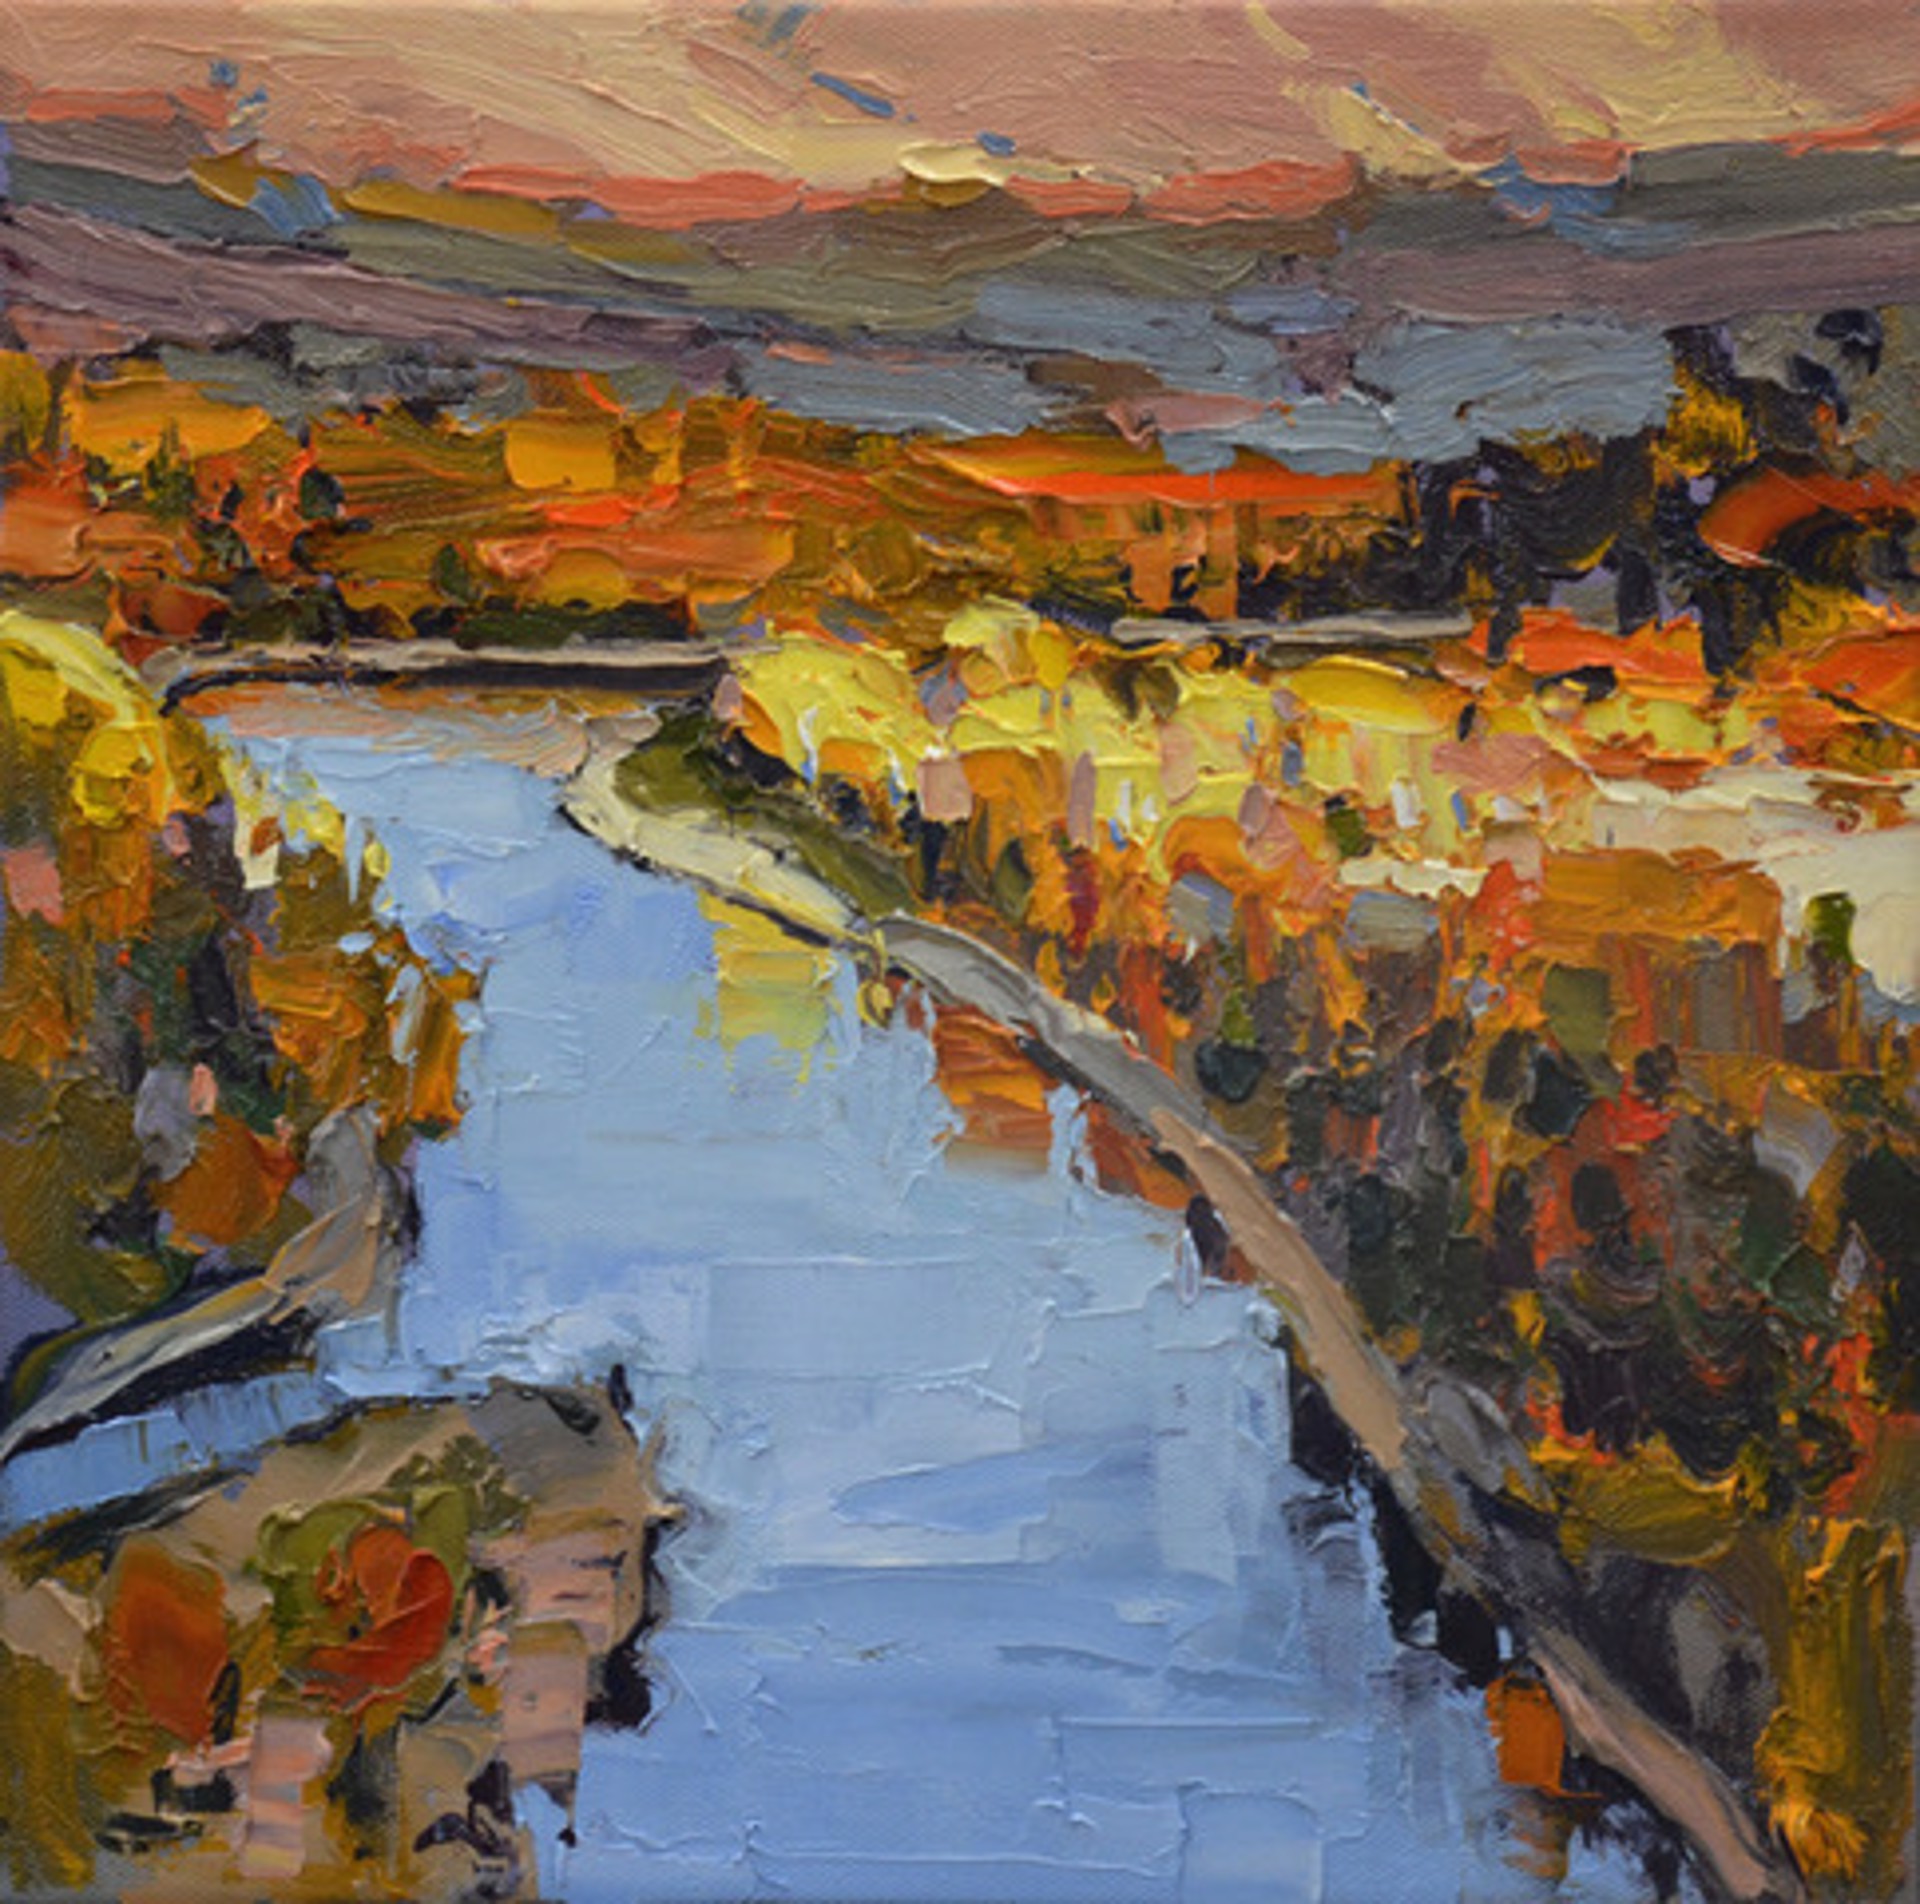 Original Oil Painting Of A High Perspective Looking Over A River Winding Through Fall Colored Trees, By Silas Thompson 